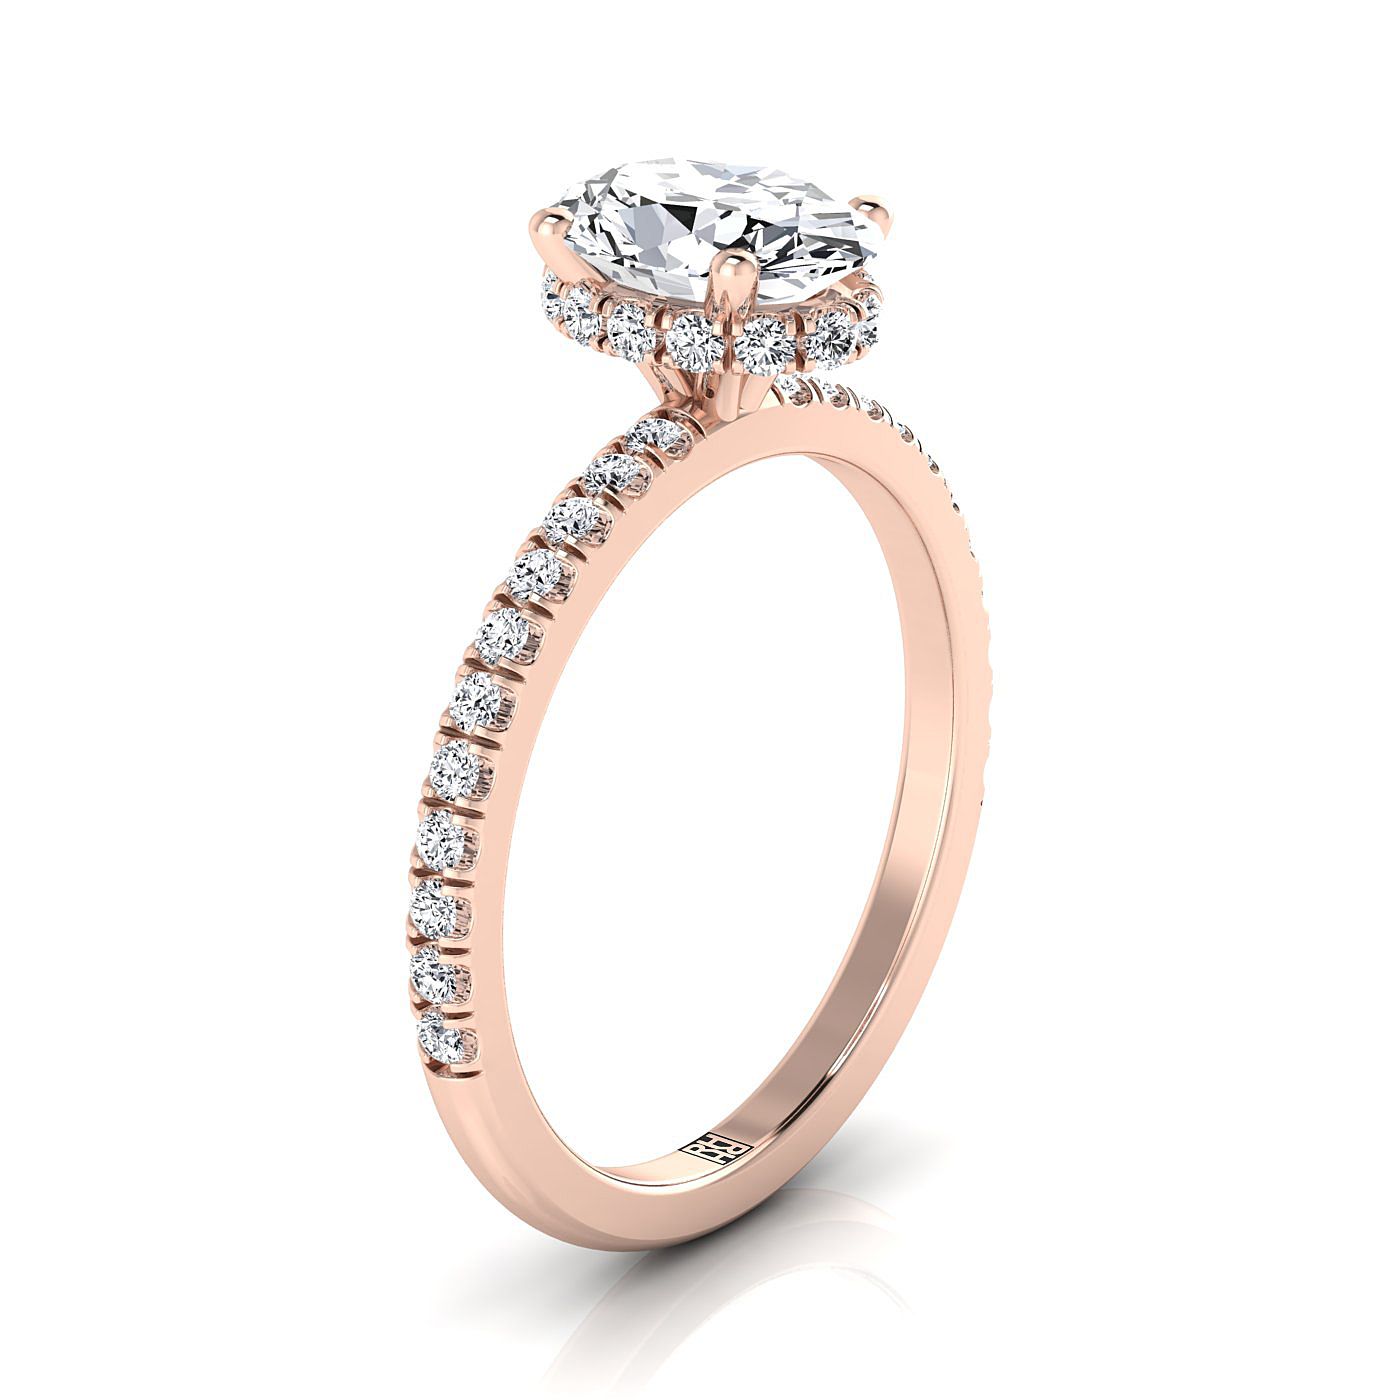 14K Rose Gold Oval Garnet Secret Diamond Halo French Pave Solitaire Engagement Ring -1/3ctw